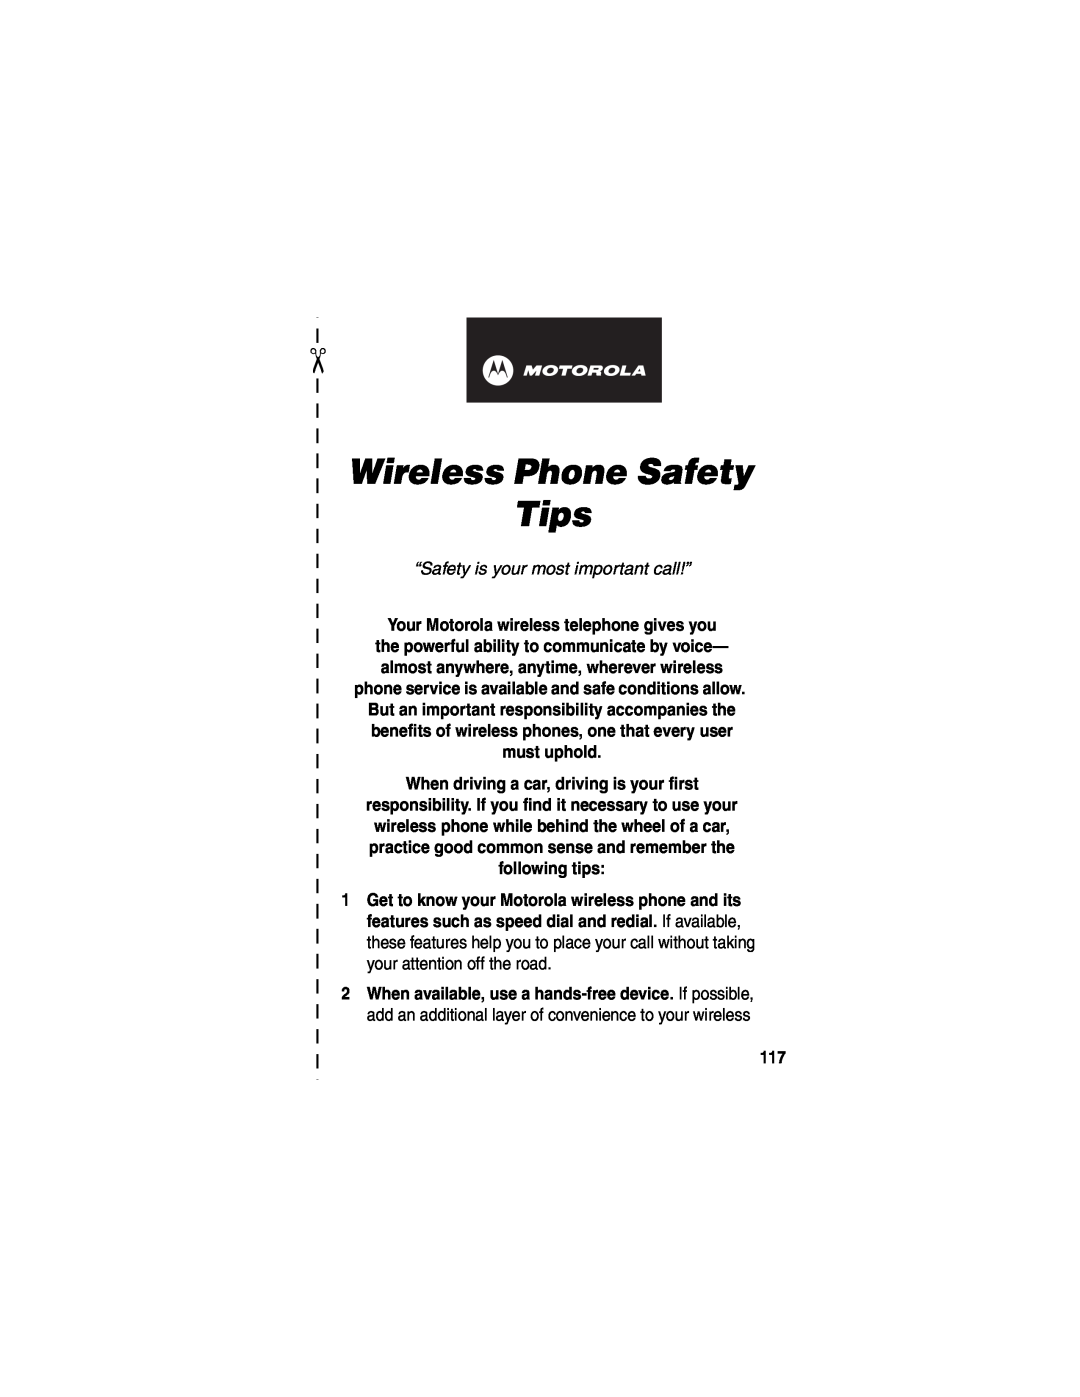 Motorola WIRELESS TELEPHONE manual Wireless Phone Safety Tips, “Safety is your most important call!” 